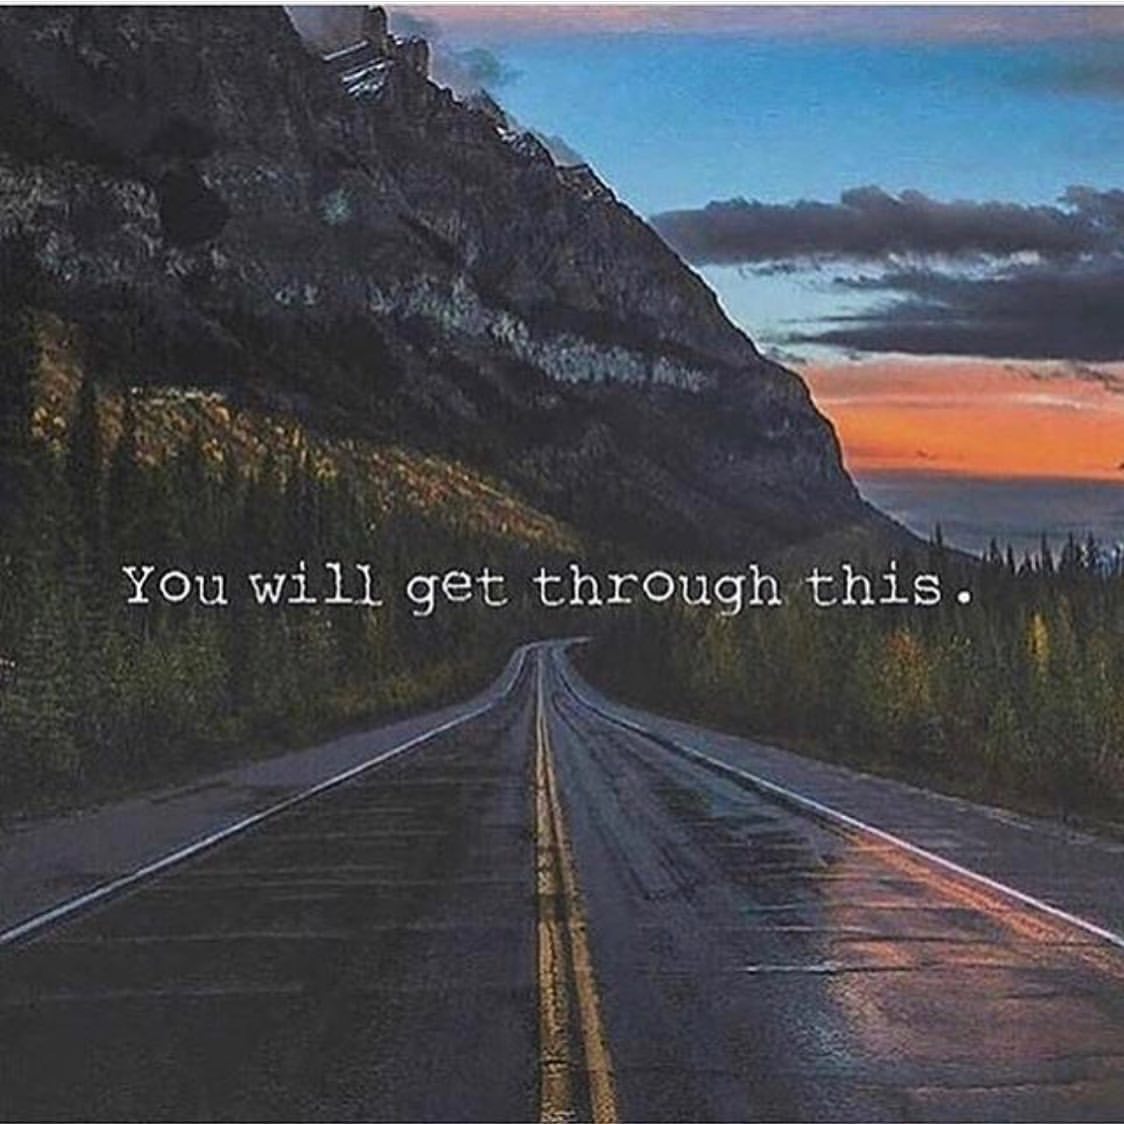 You will get through this.